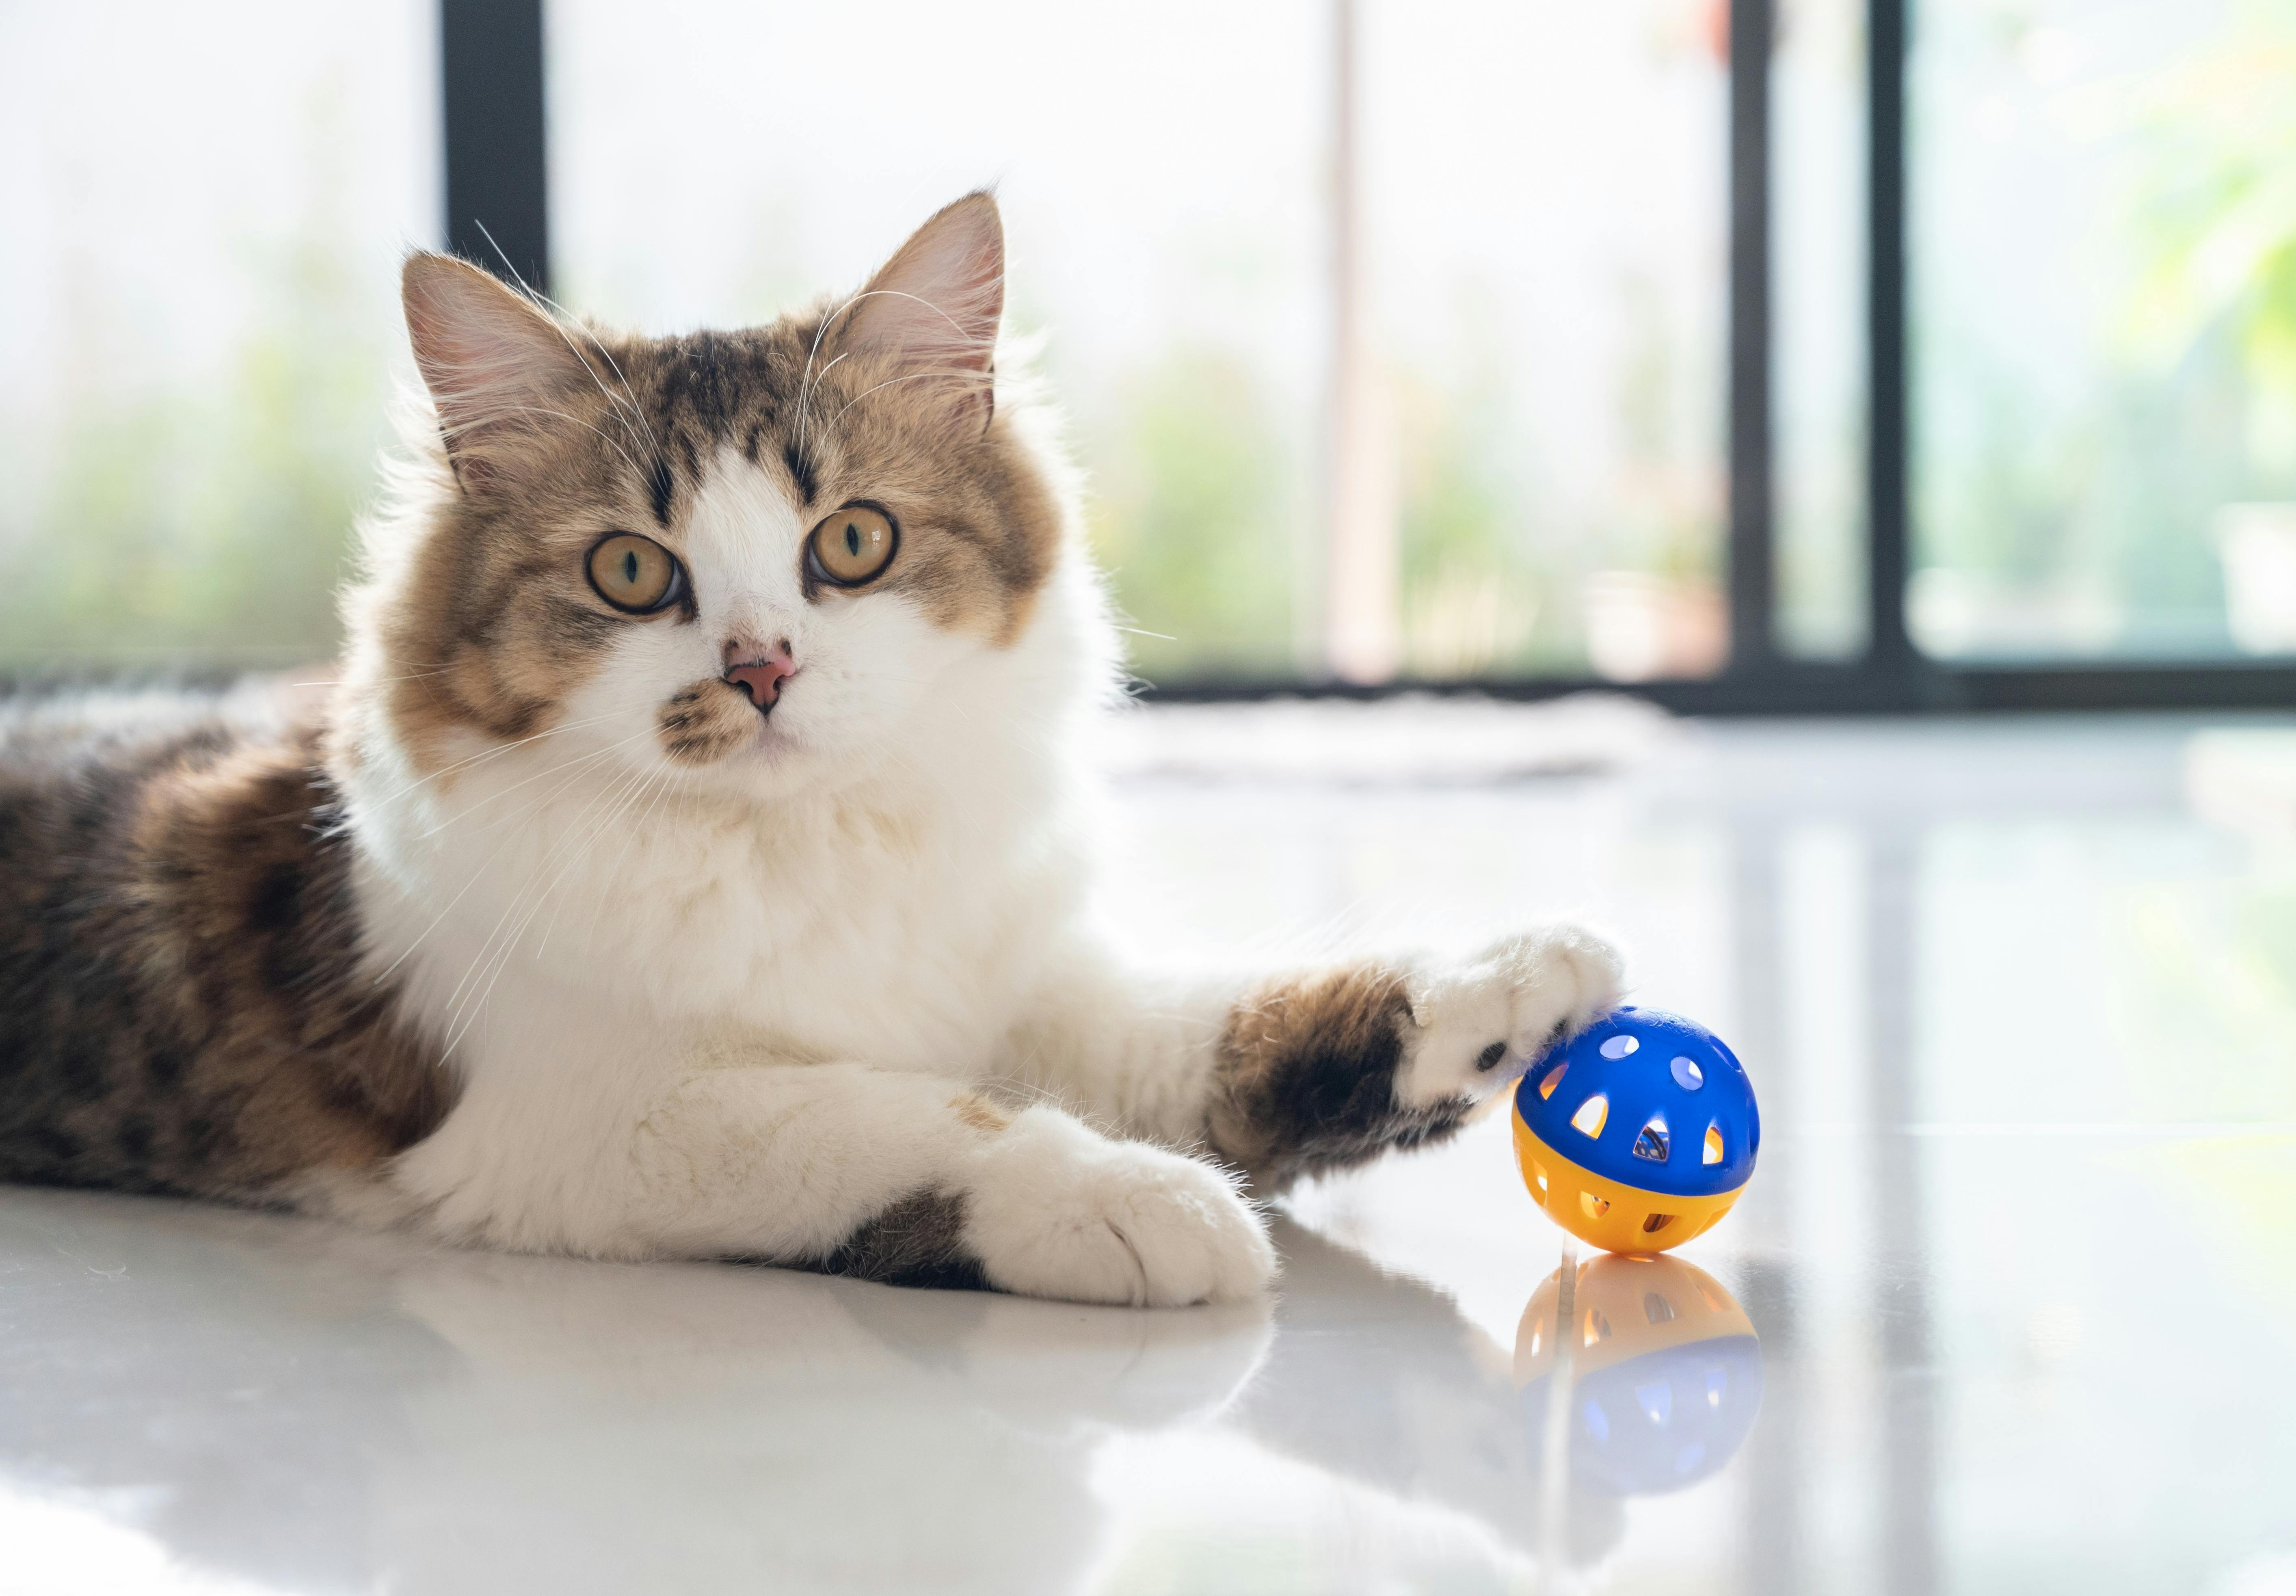 Cat playing with a small blue and yellow ball.